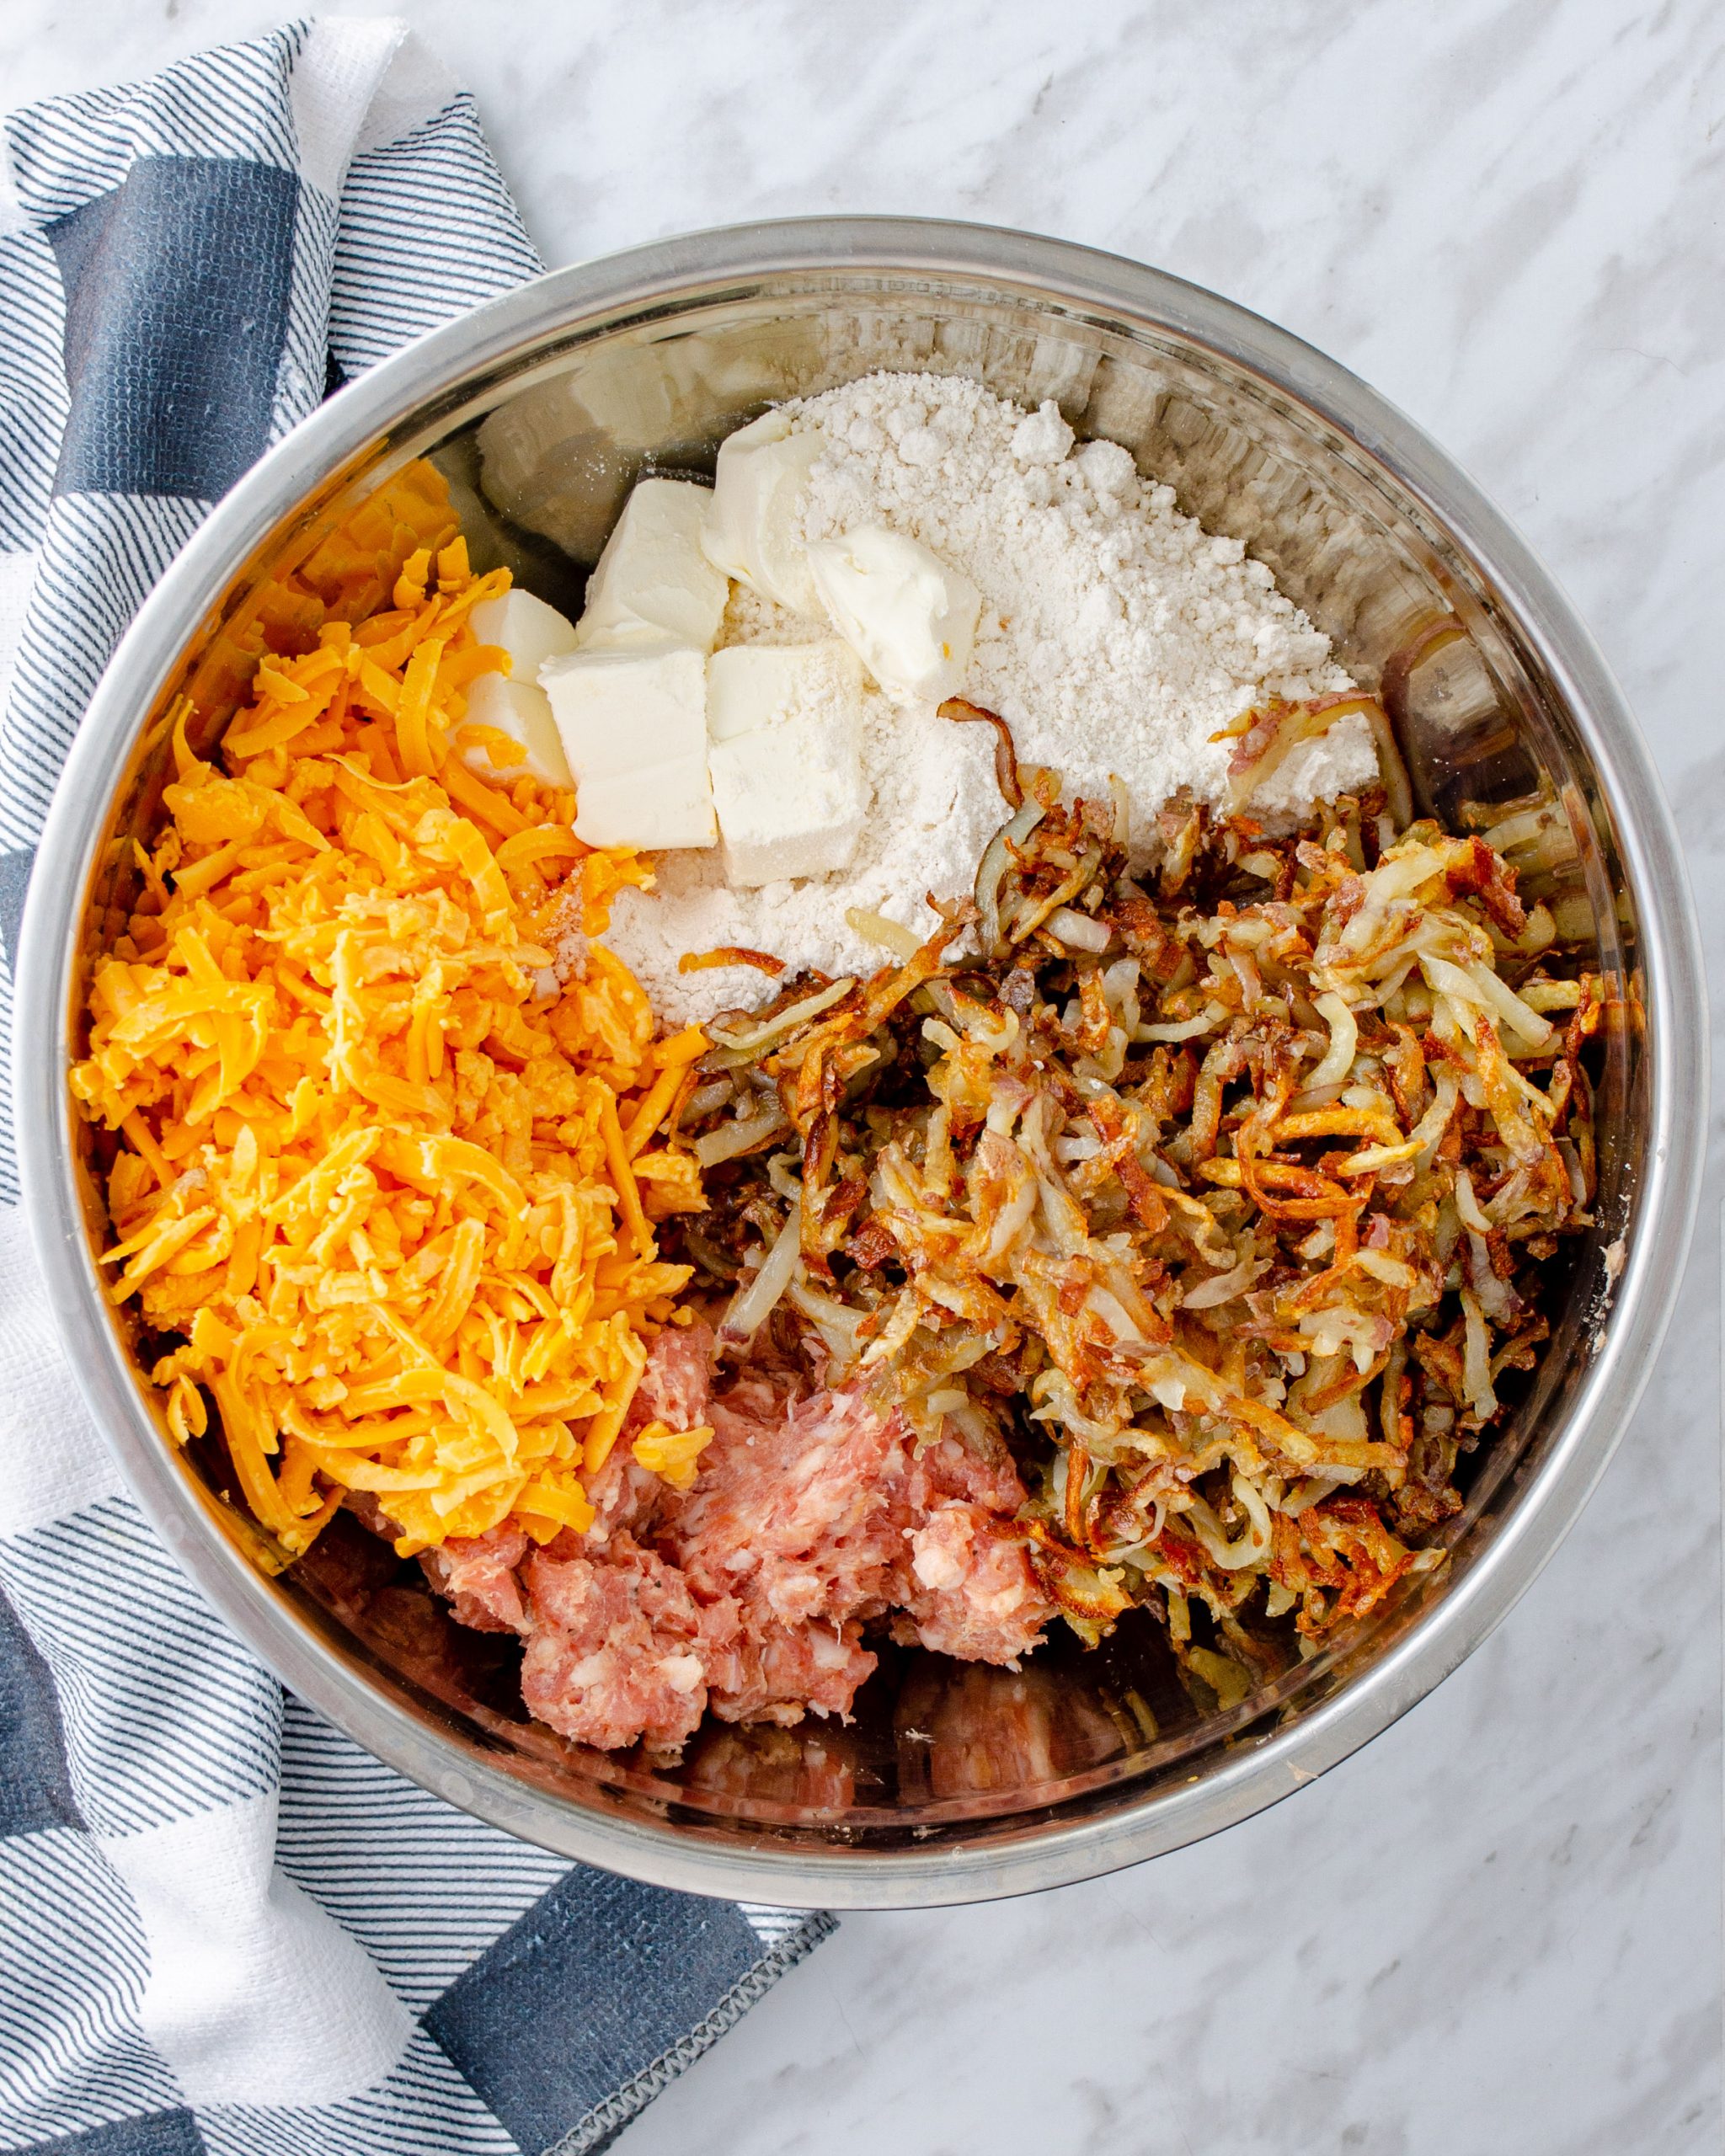  Combine all of the ingredients in a large mixing bowl.